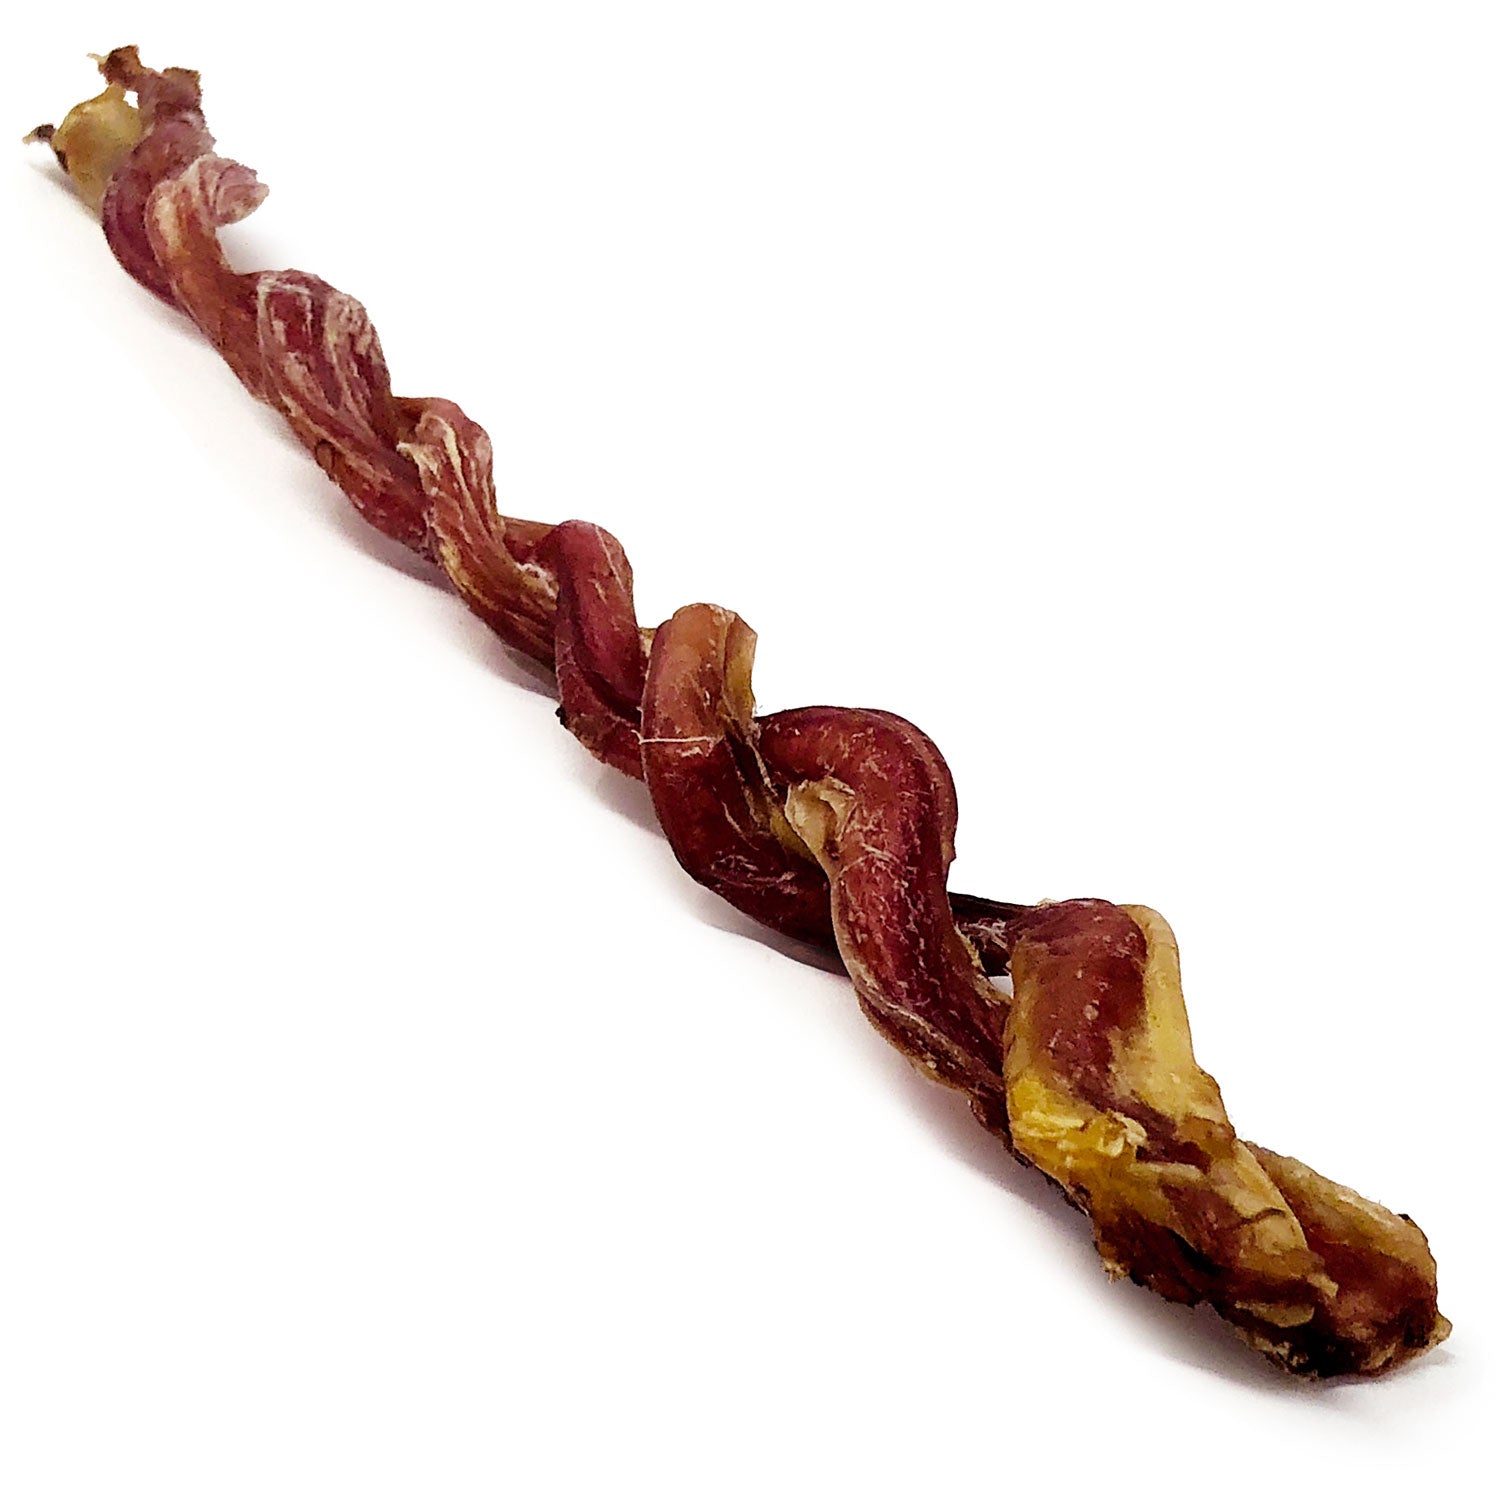 ValueBull USA Lamb Pizzle Twist Dog Chews, 8-11 Inch, 25 Count